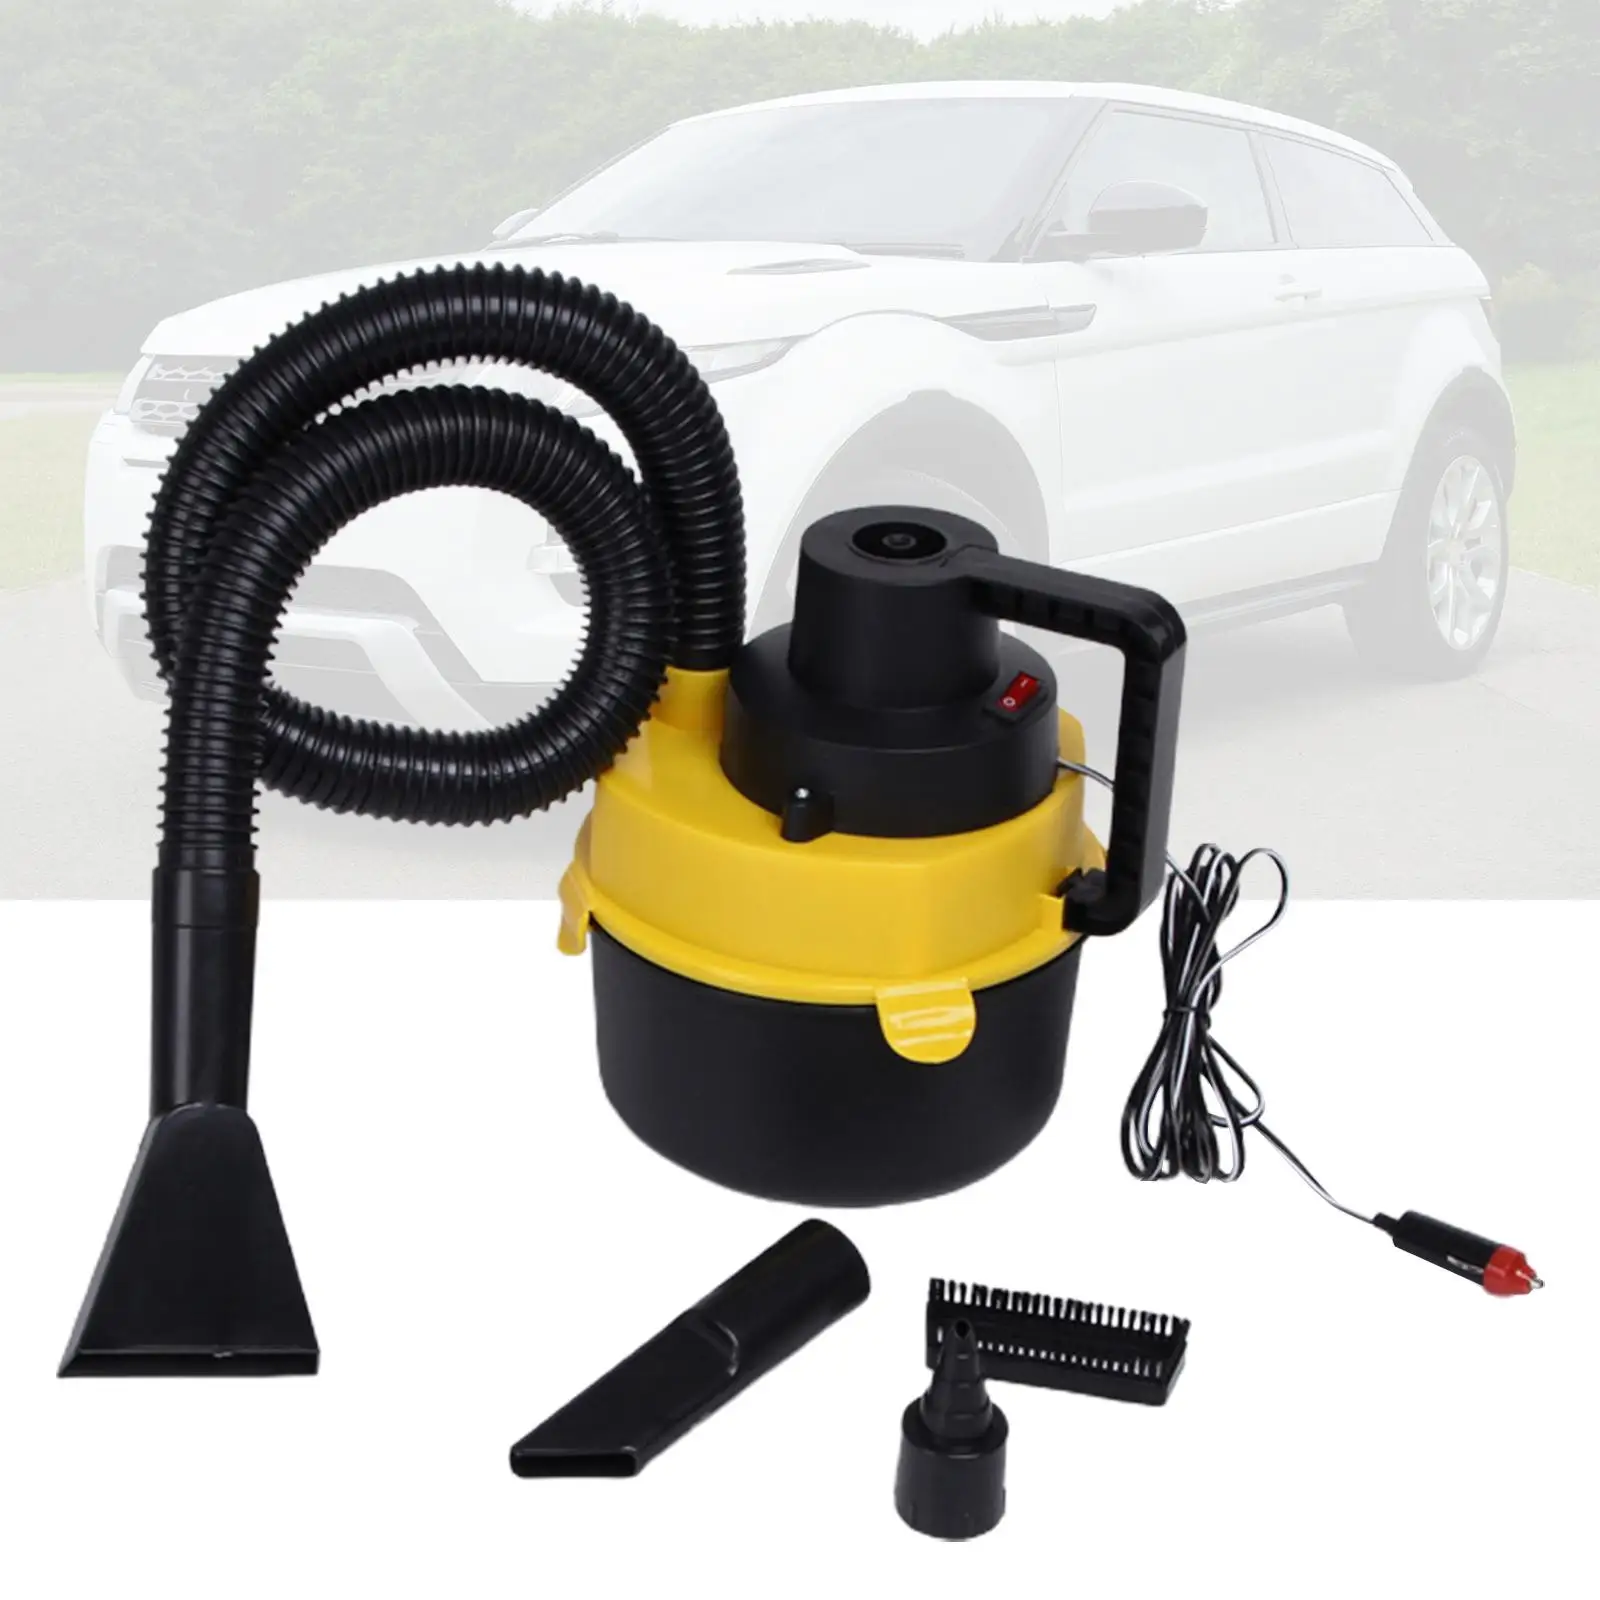 Car Vacuum Cleaner Quick Cleaning Handheld Duster for Vehicle Camper RV